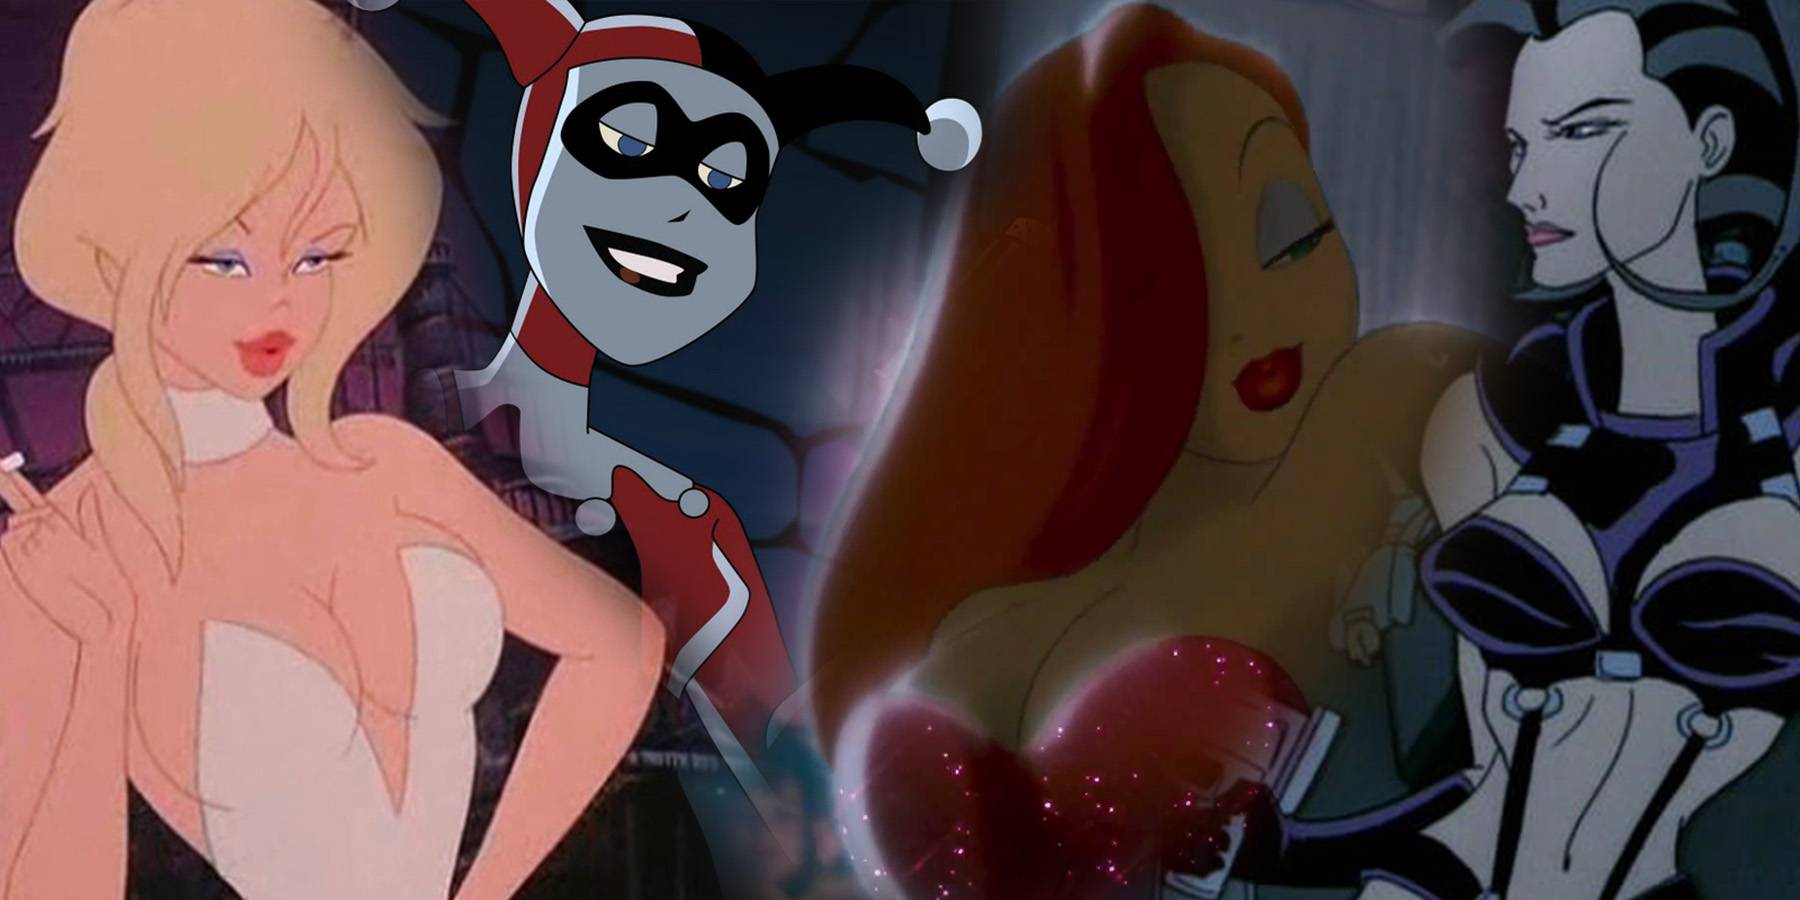 10 Sexy Adult Cartoon Characters You'll Want to Get Naughty With